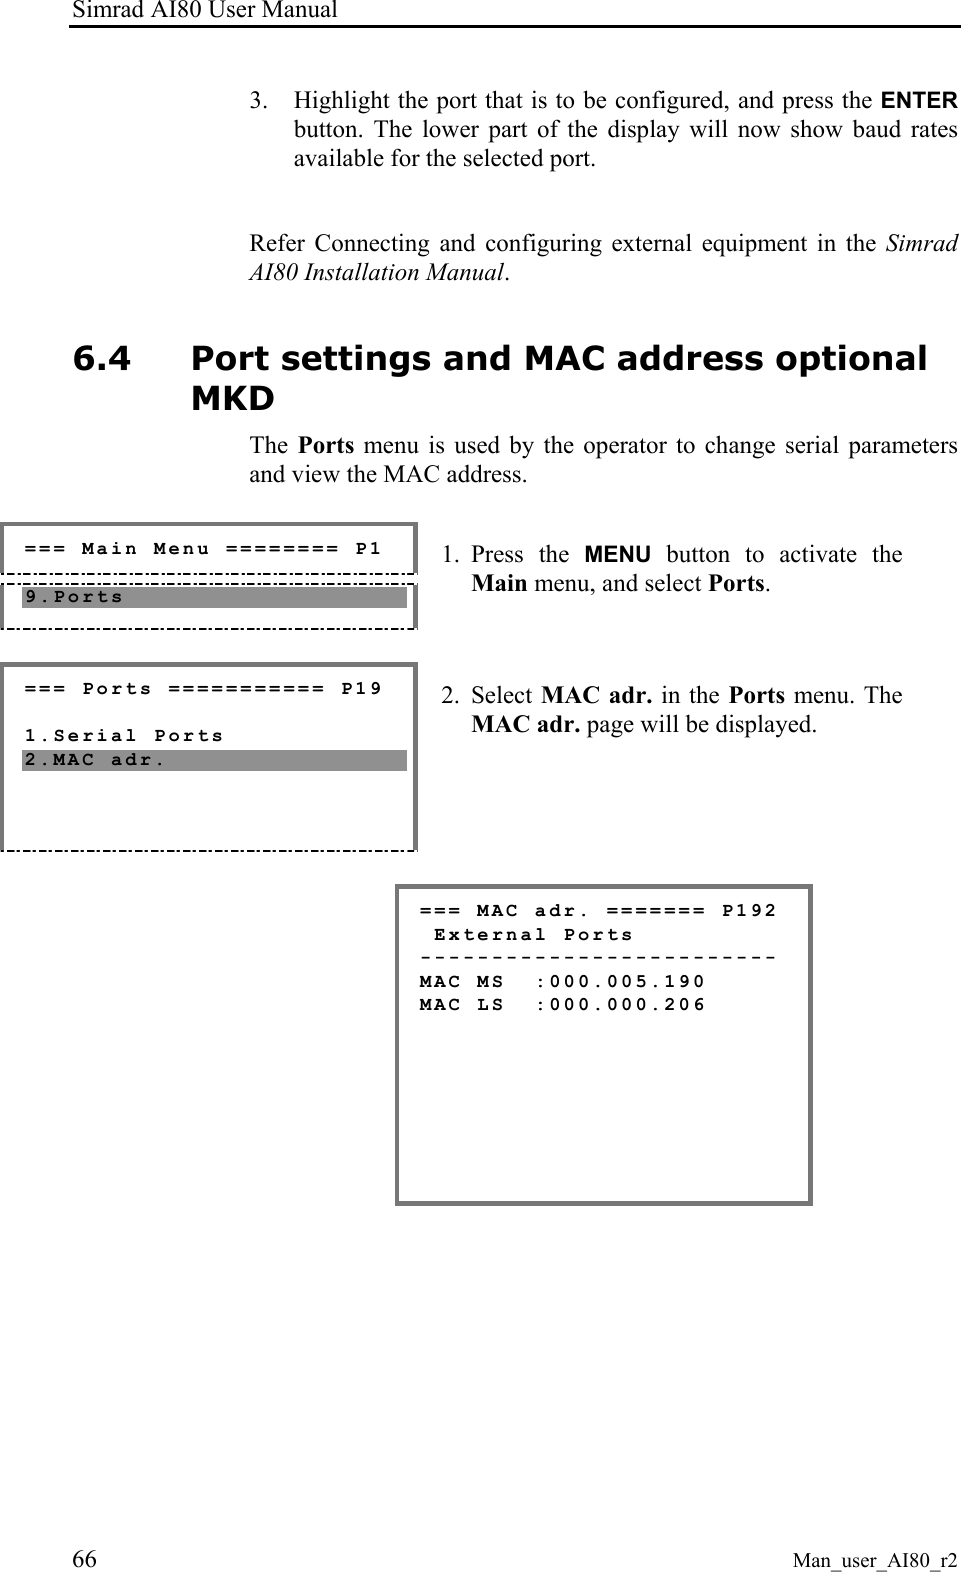 Simrad AI80 User Manual 66 Man_user_AI80_r2 3. Highlight the port that is to be configured, and press the ENTER button. The lower part of the display will now show baud rates available for the selected port.  Refer Connecting and configuring external equipment in the Simrad AI80 Installation Manual. 6.4 Port settings and MAC address optional MKD The  Ports menu is used by the operator to change serial parameters and view the MAC address.   === Main Menu ======== P1 9.Ports  1. Press the MENU button to activate the Main menu, and select Ports.  === Ports =========== P19  1.Serial Ports 2.MAC adr.  2. Select MAC adr. in the Ports menu. The MAC adr. page will be displayed.  === MAC adr. ======= P192  External Ports ------------------------- MAC MS  :000.005.190 MAC LS  :000.000.206        